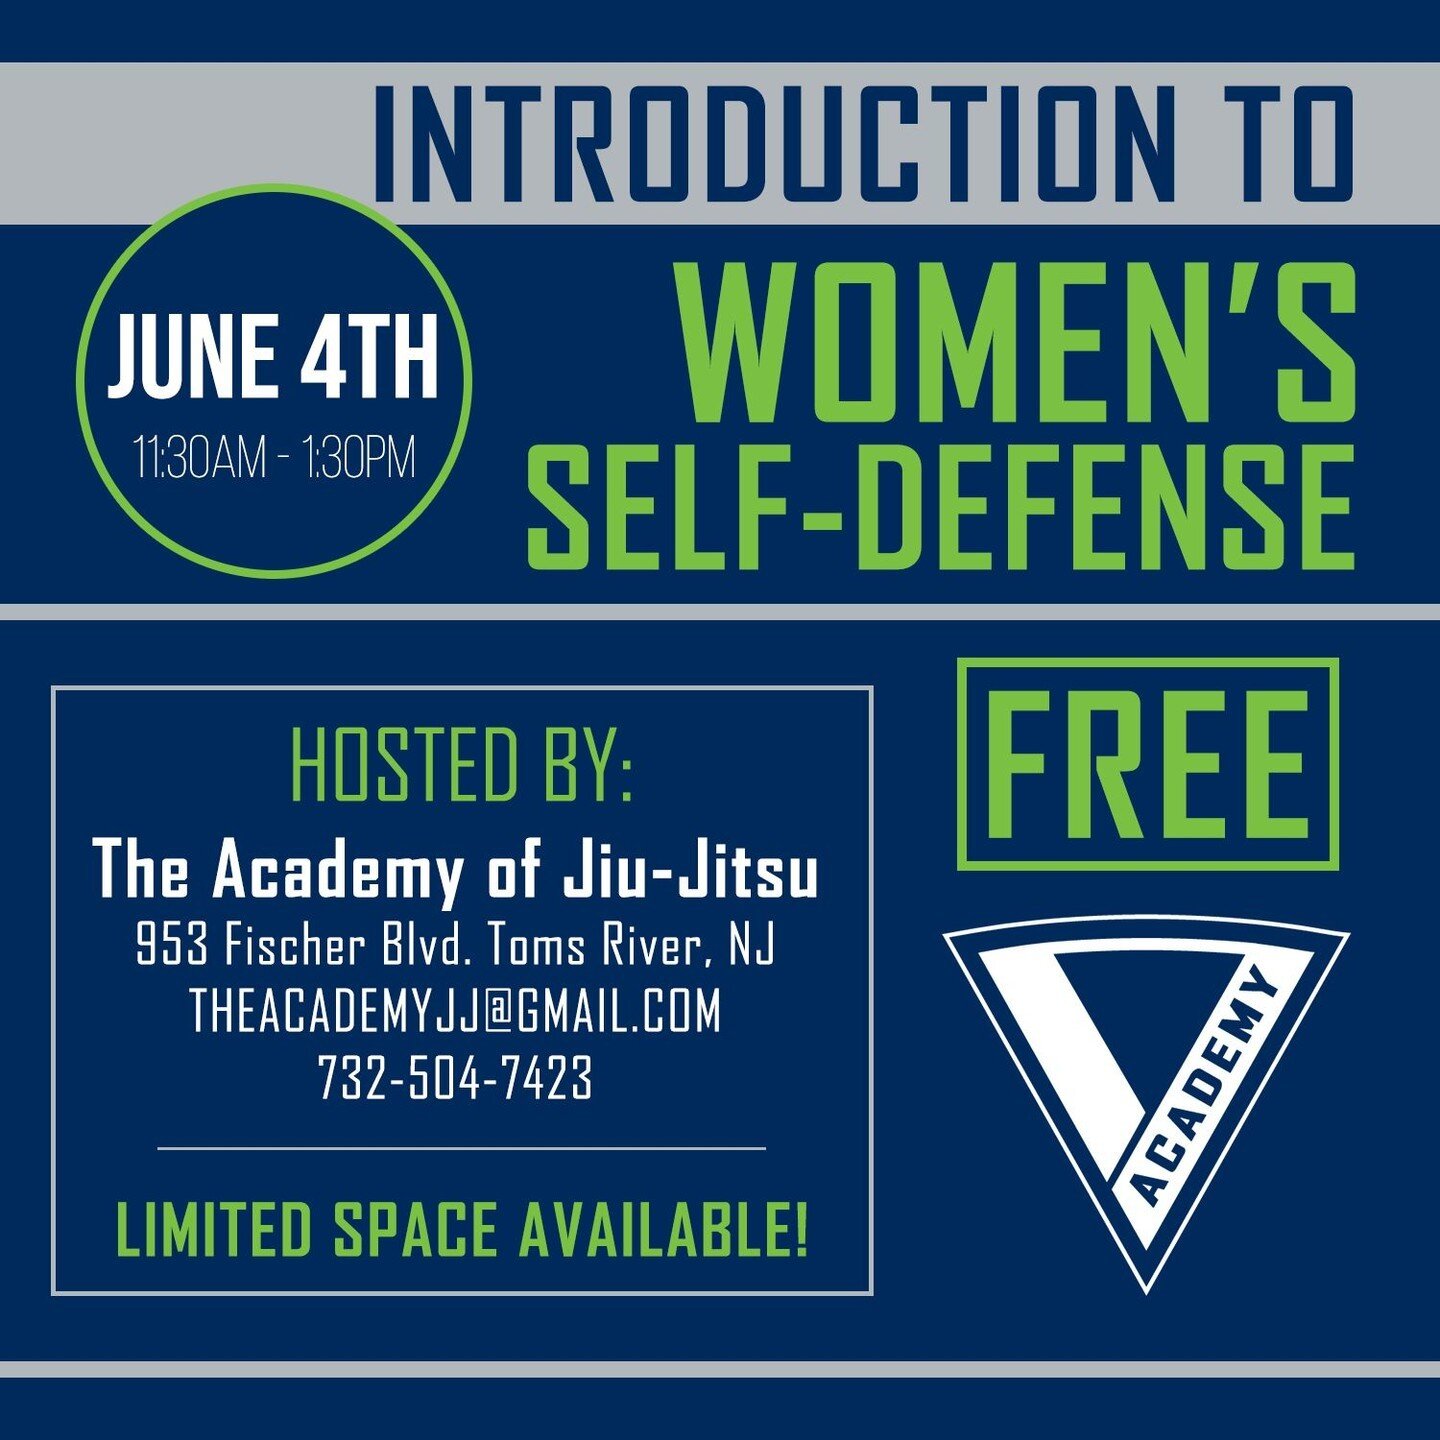 We are excited to announce a FREE Seminar for Women's Self-Defense on June 4th, 2023! We'd like to invite all women, regardless of skillset, to join us in this introduction to the essentials to defend yourself in a variety of scenarios. Email, call, 